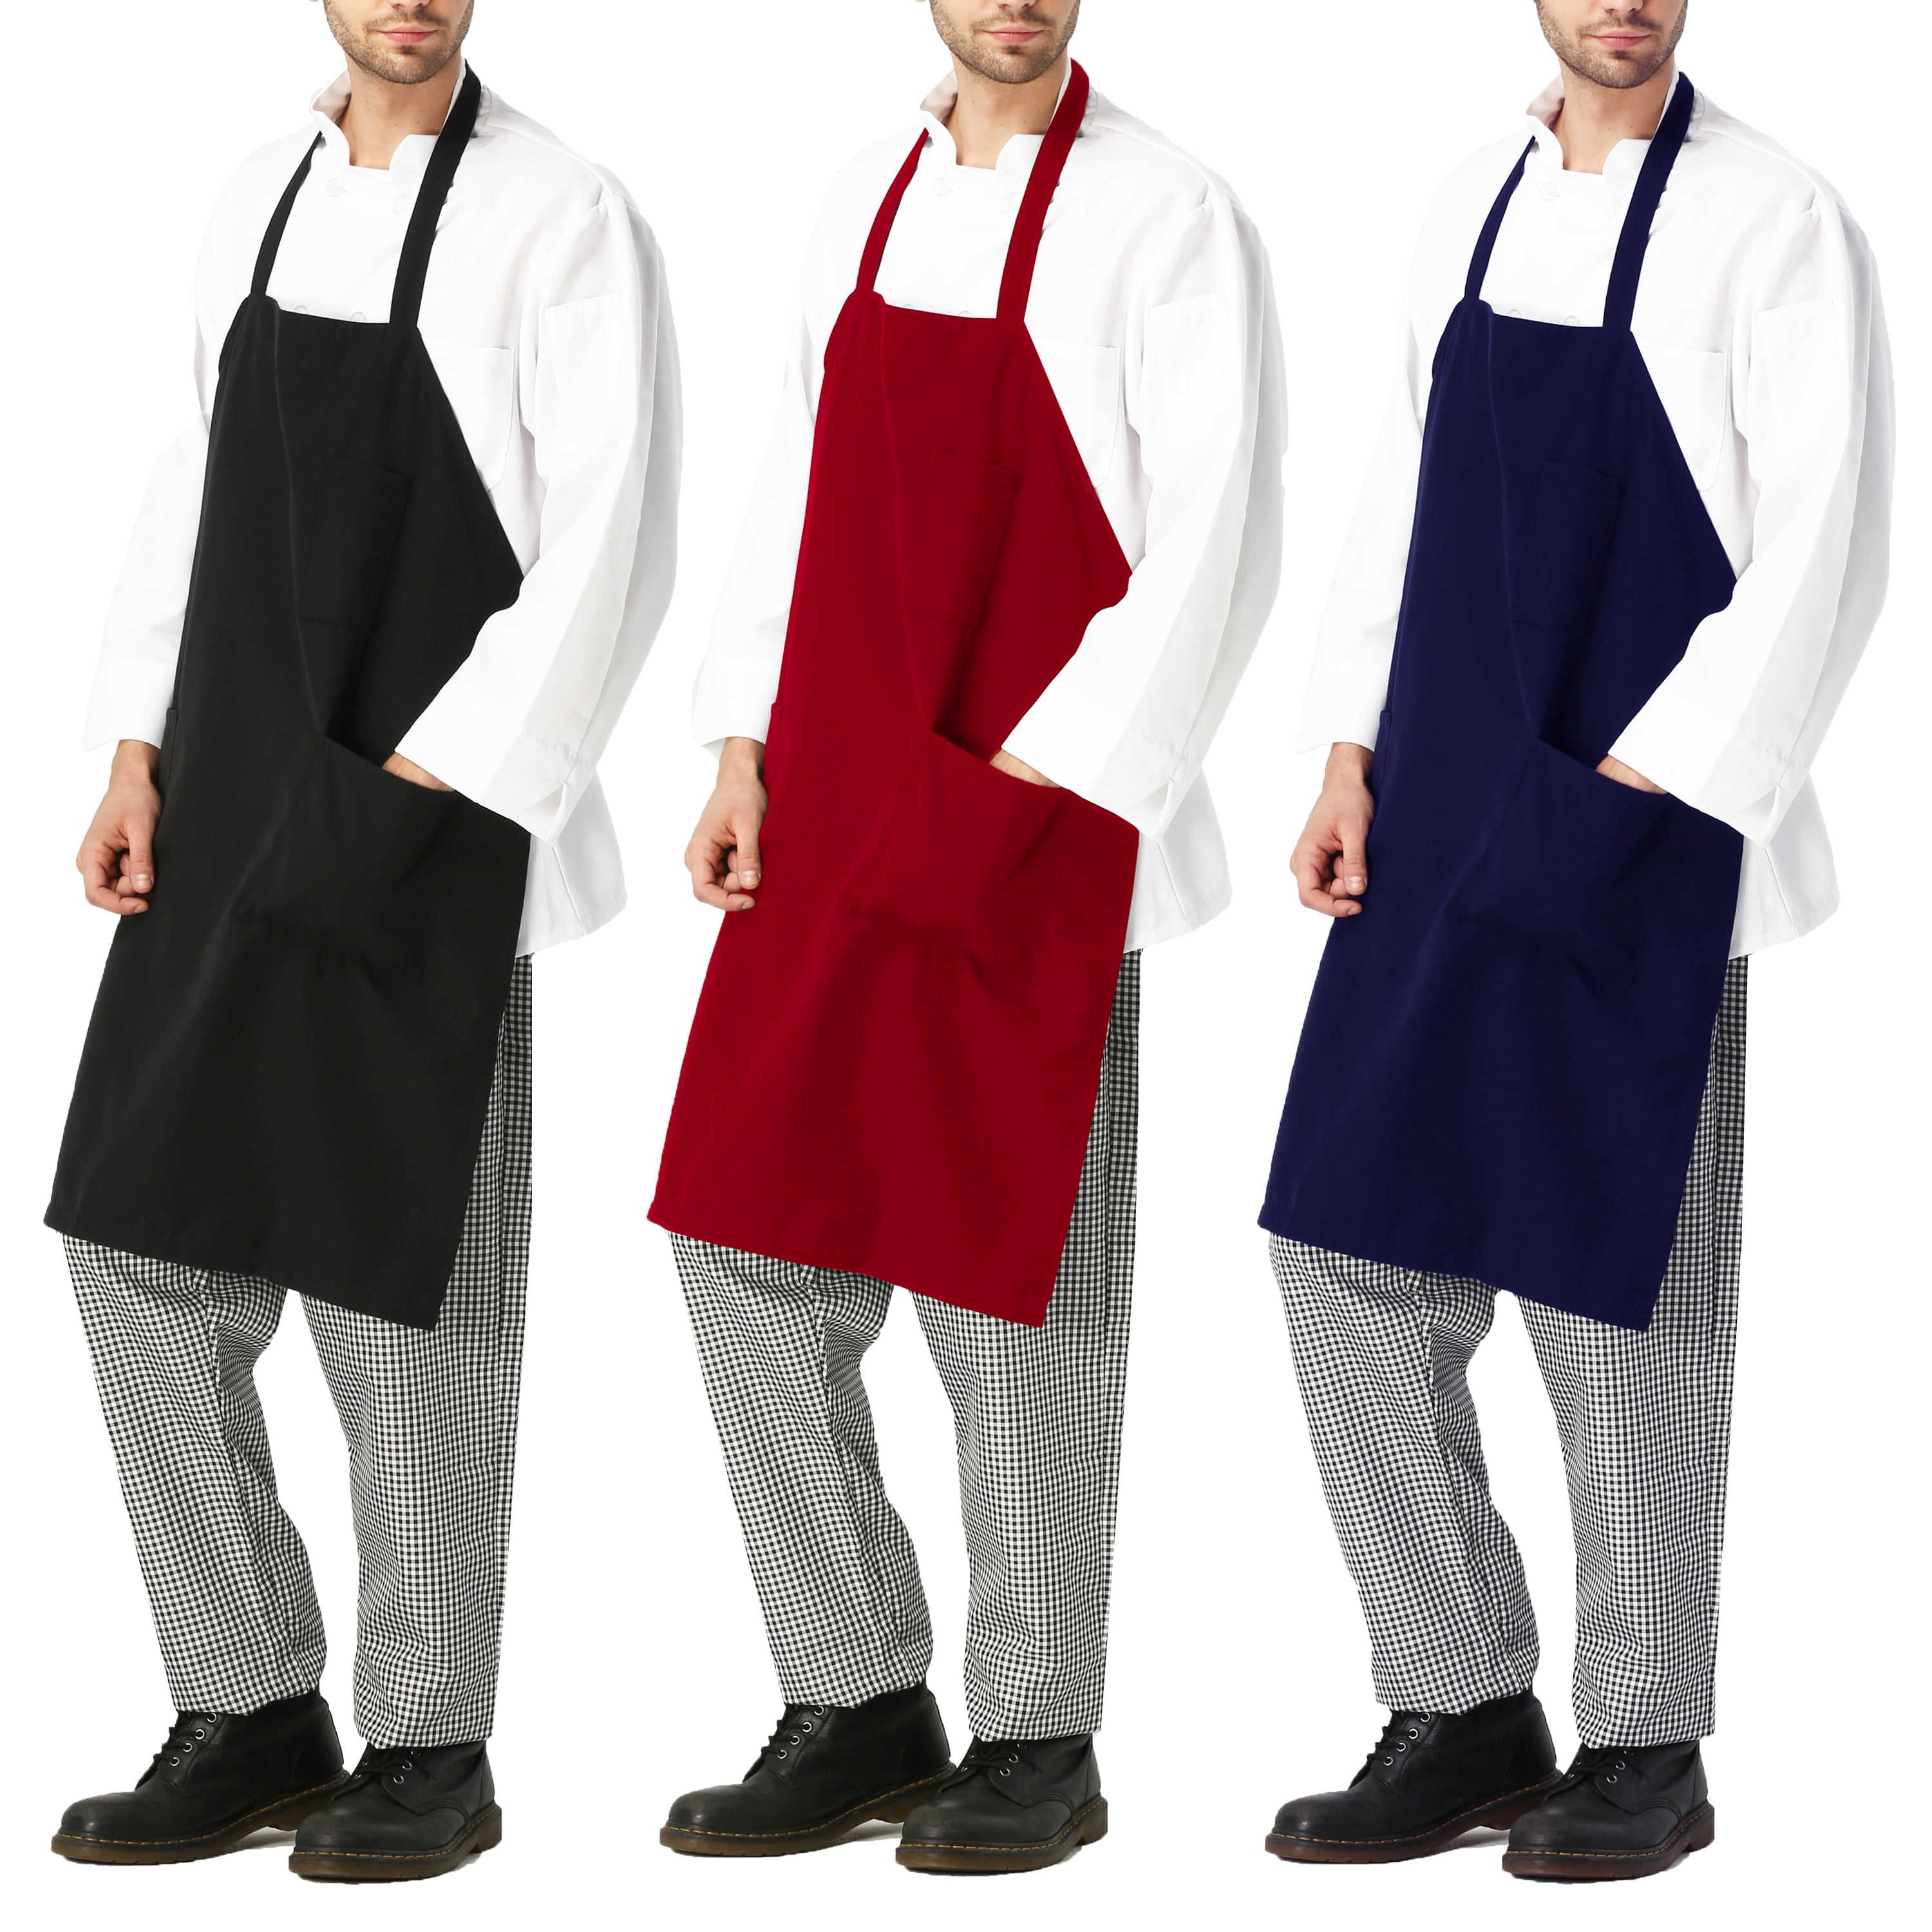 Red Navy Black Apron Restaurant Grill BBQ Commercial Home Kitchen Chef Cook Bib 